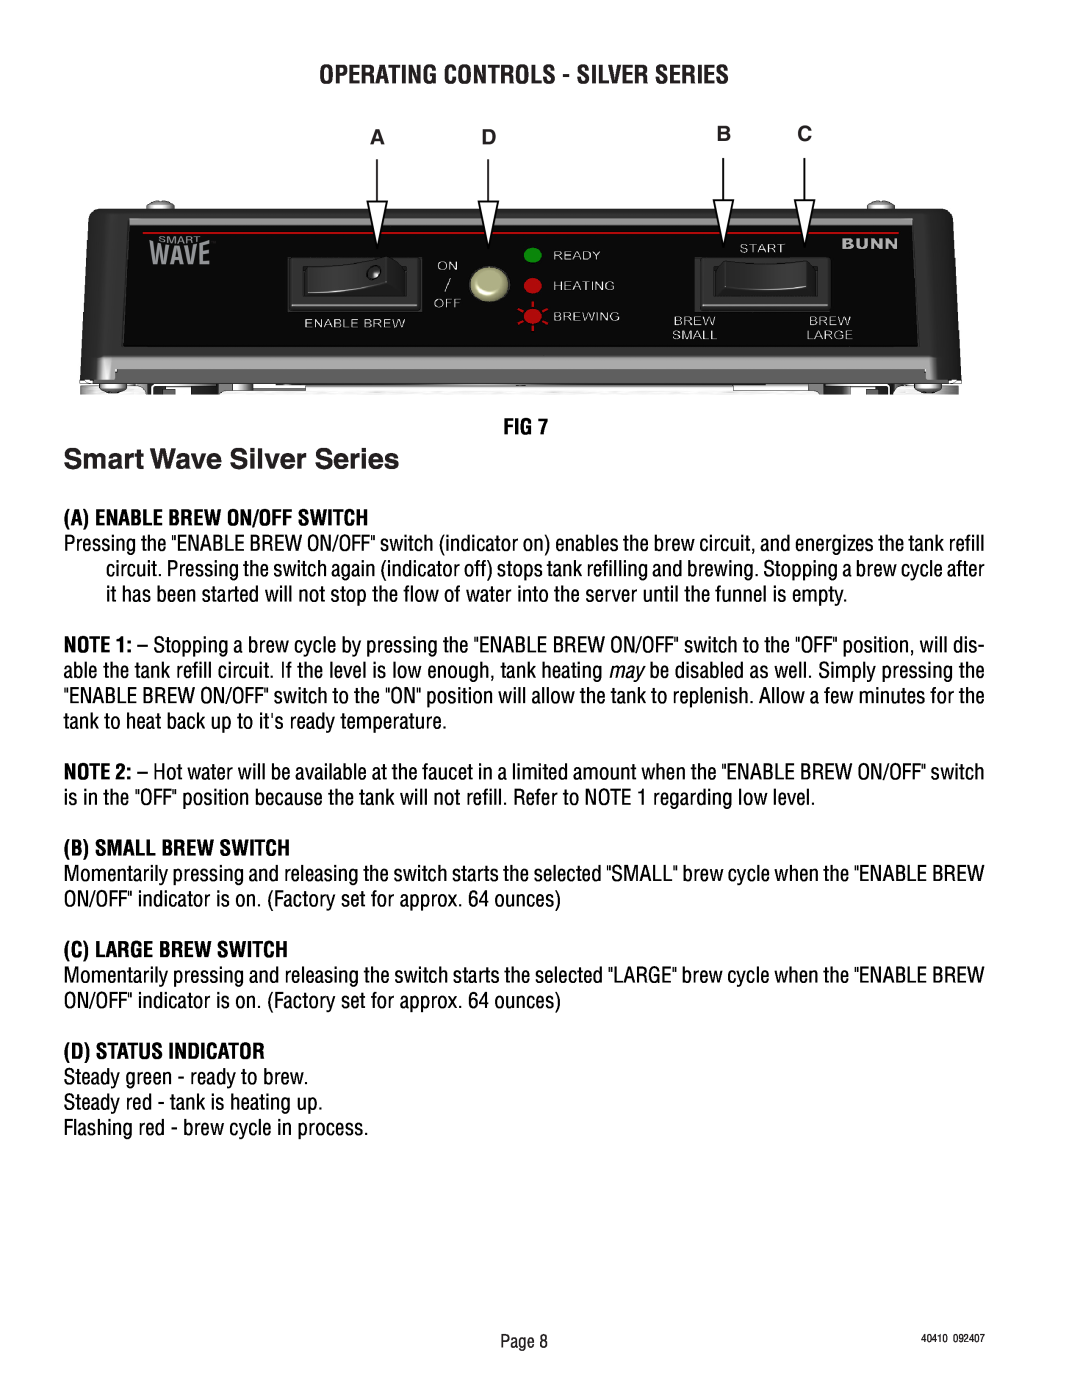 Bunn Smart Wave Series Smart Wave Silver Series, Operating Controls - Silver Series, A Db C, A Enable Brew On/Off Switch 